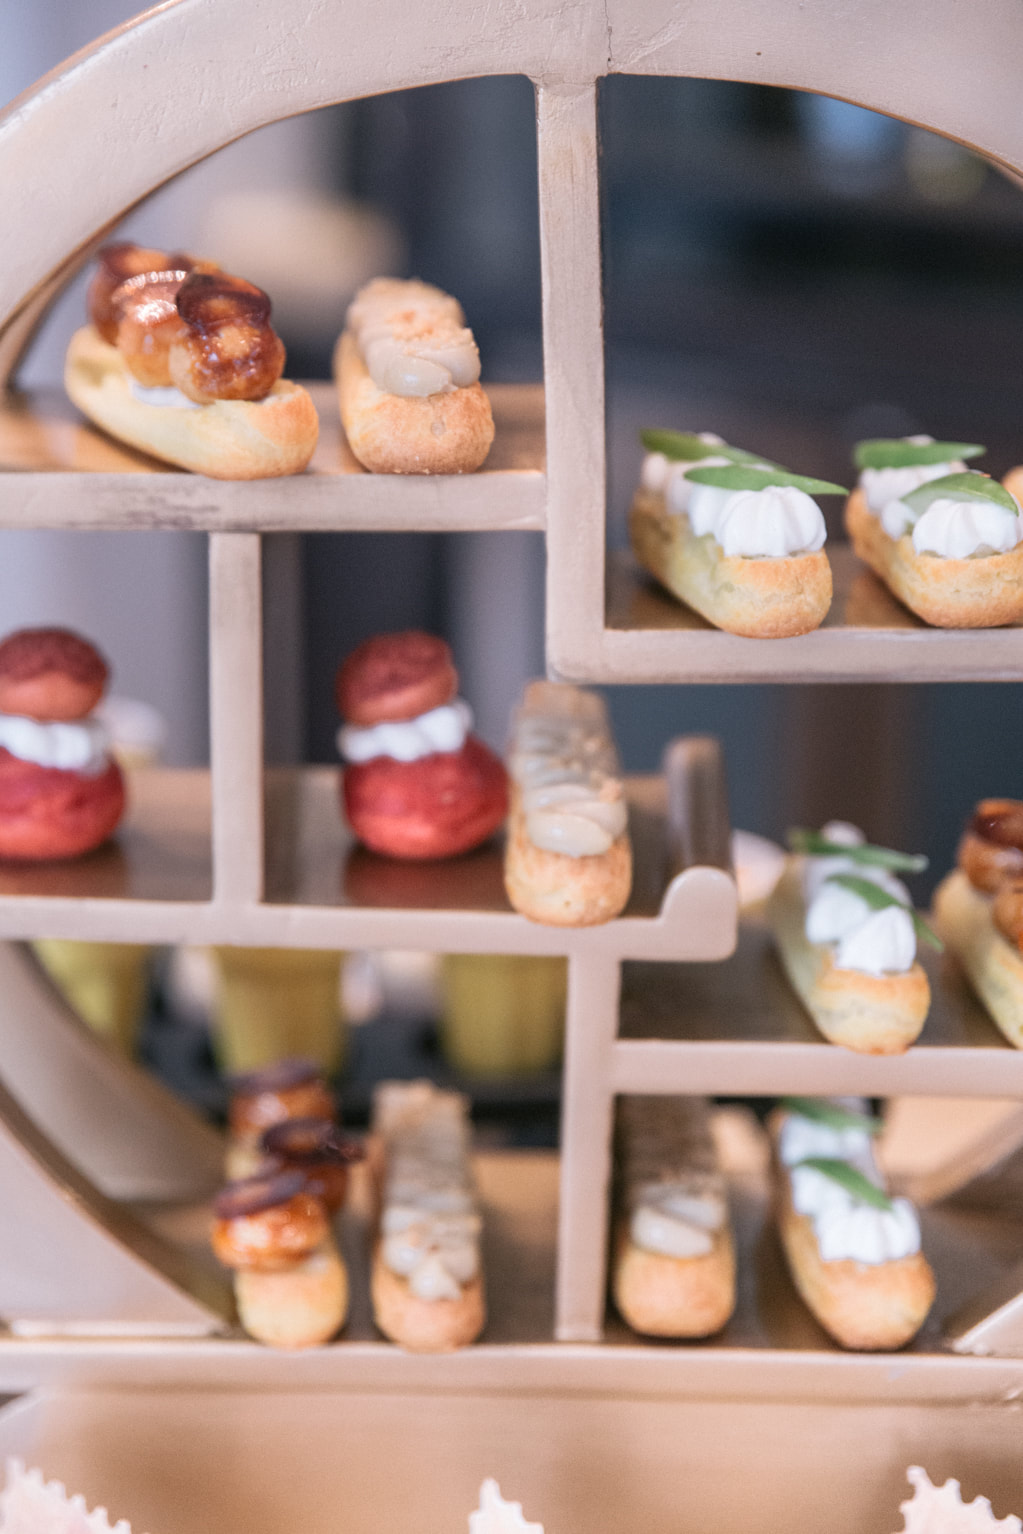 Afternoon tea at Hotel des arts, Saigon By The Belle Blog